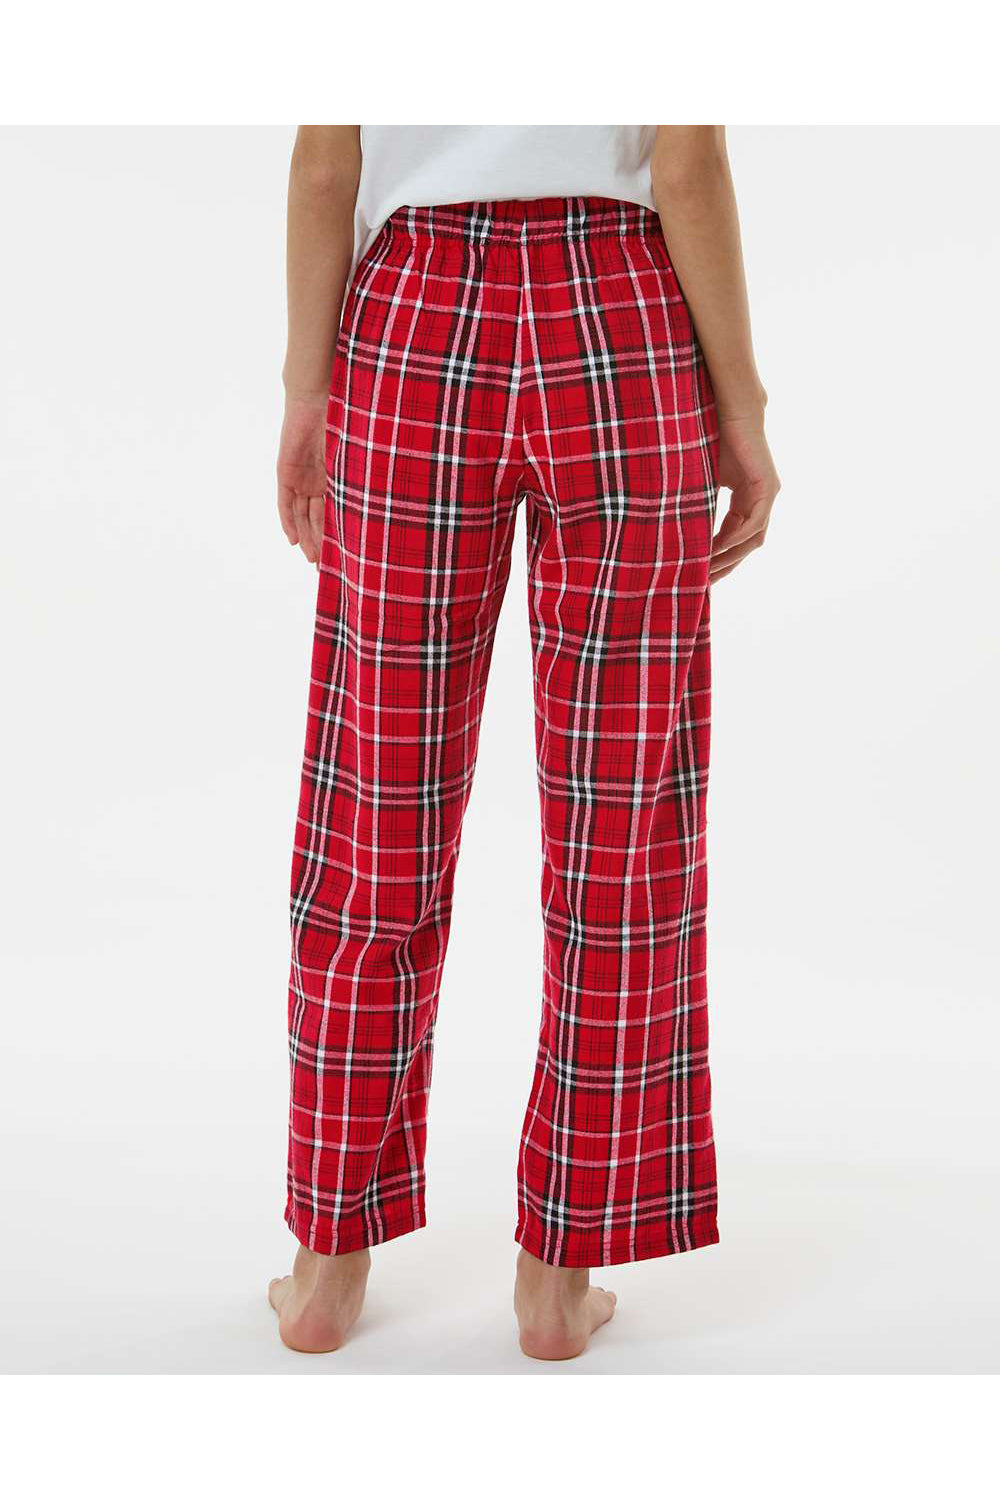 Boxercraft BY6624 Youth Flannel Pants Red/White Model Back